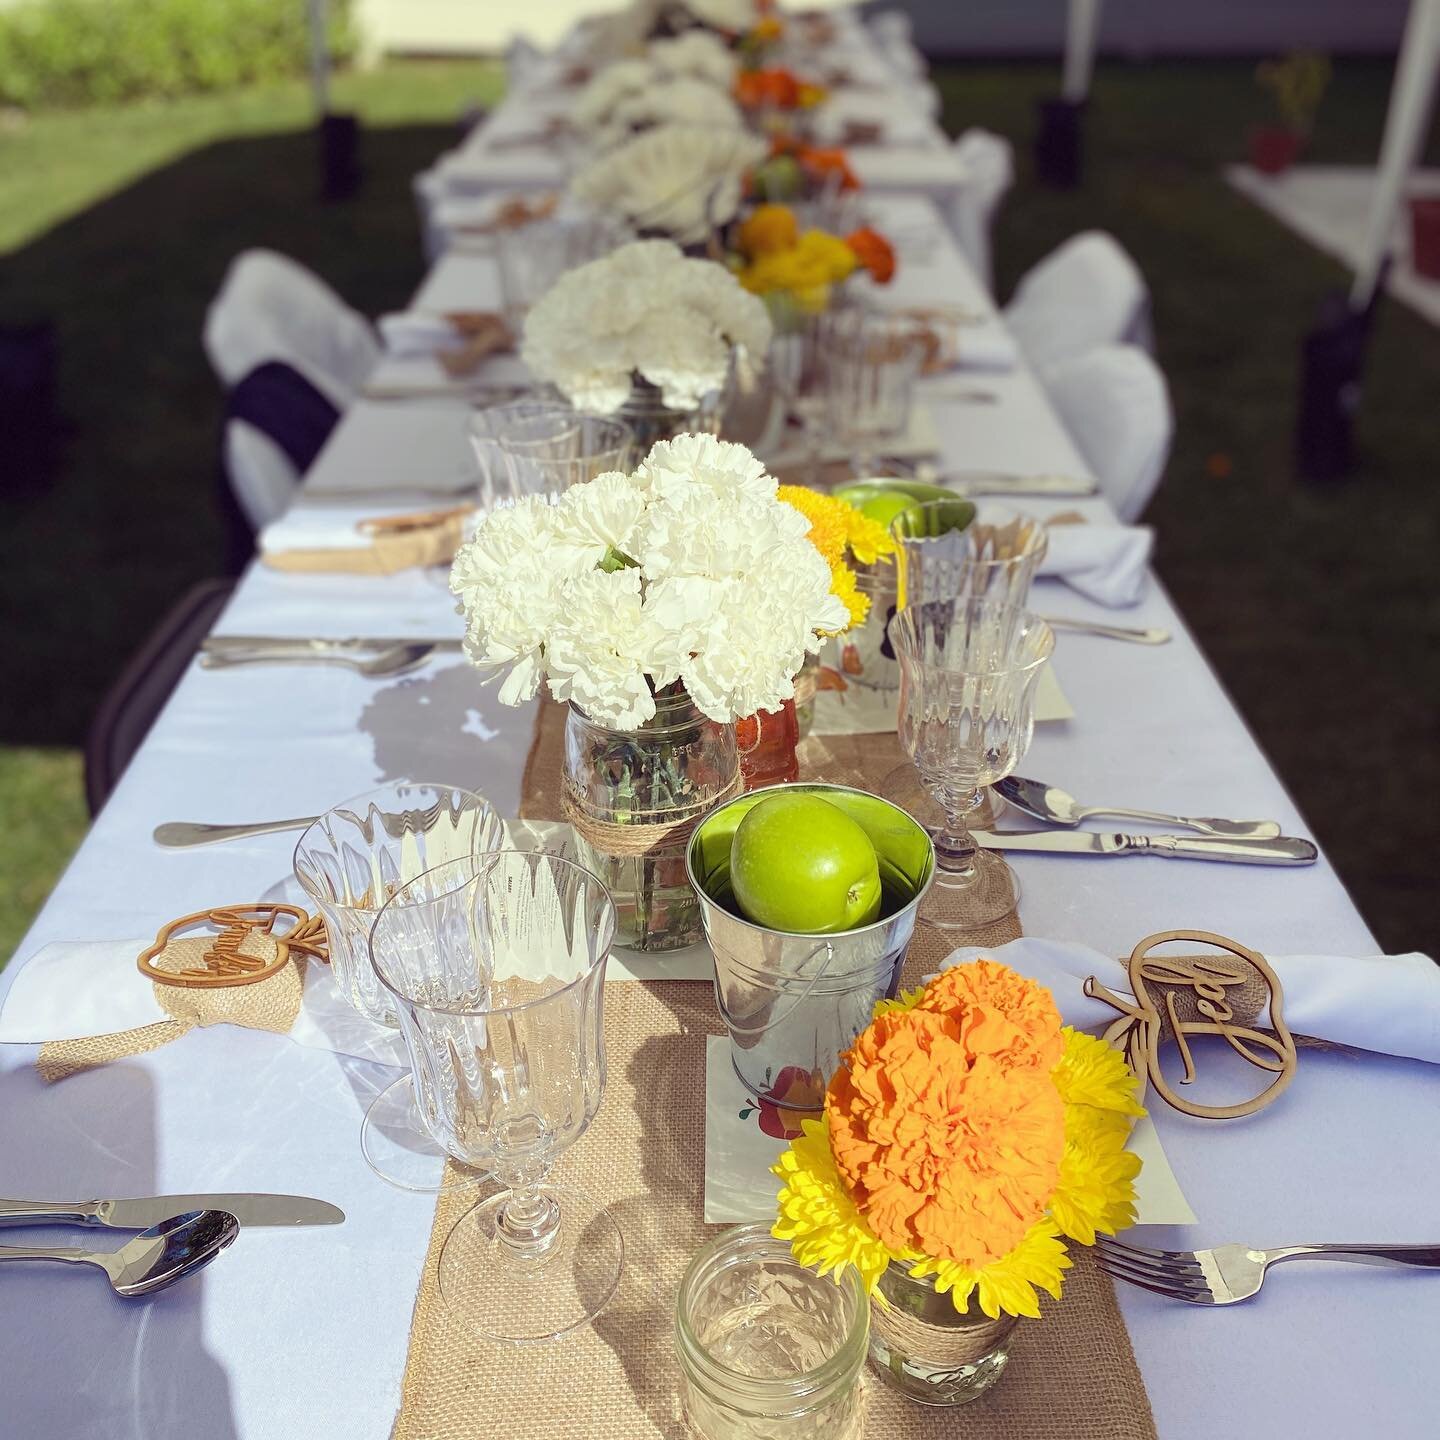 We were so lucky to spend time with #family for #RoshHashanah 🍏 
I wonder what will happen for #thanksgiving2020 🦃 

#flowers #hydrangea #tablescape #appledecor #centerpiece #entertaining #eatingoutside #smpliving #holidaydecor #decor #thanksgiving